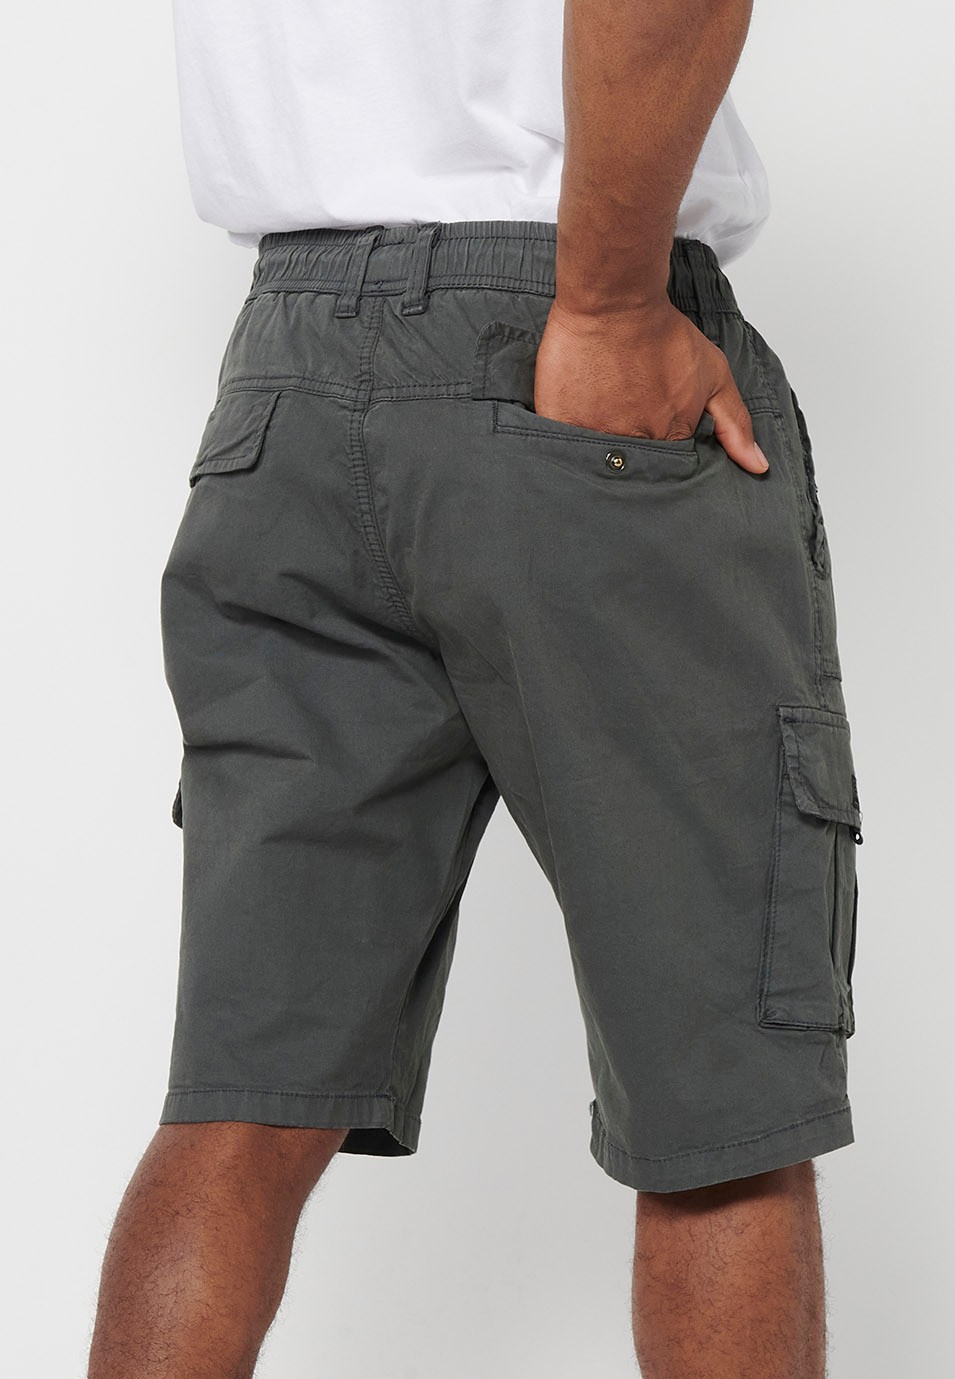 Cargo shorts with side pockets with flap and front closure with zipper and button Color Gray for Men 9